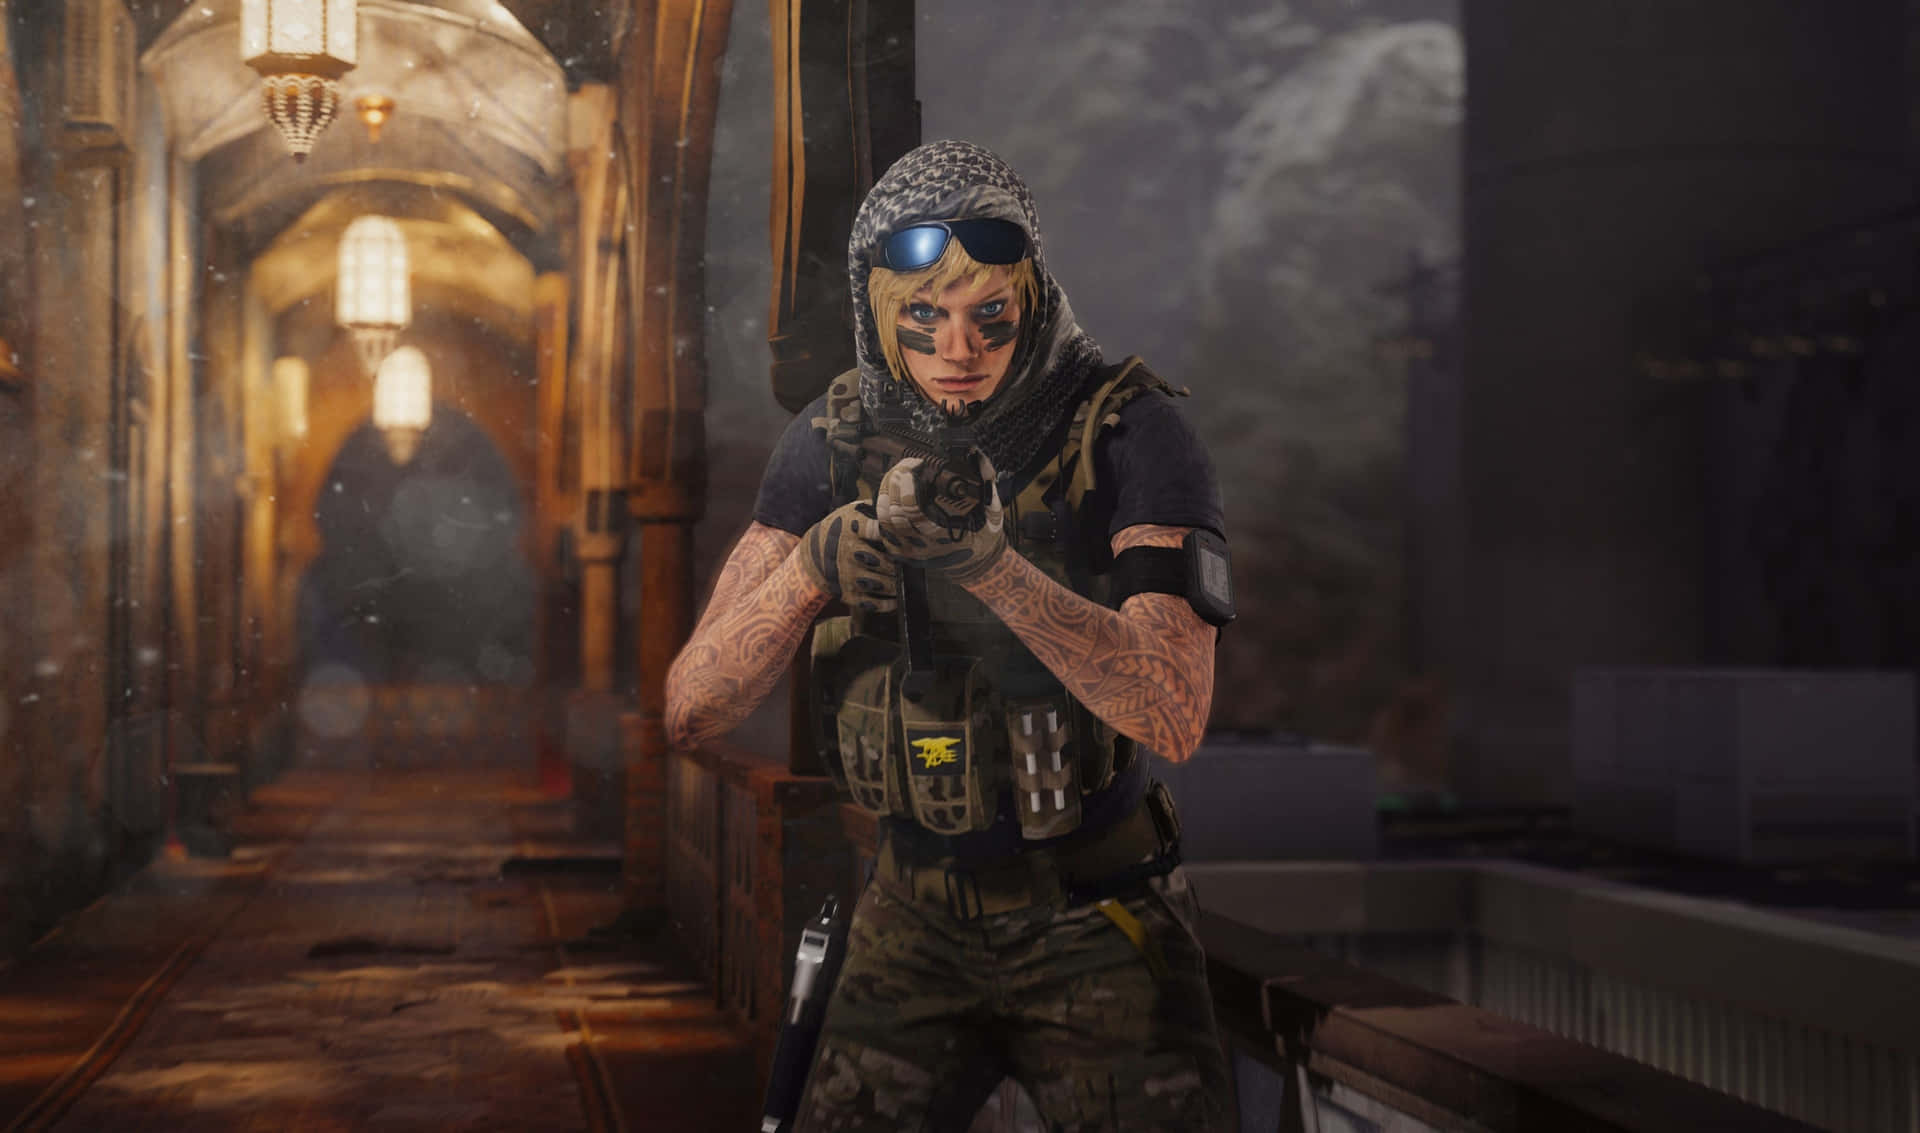 “Rainbow Six Siege: Sharpen Your Skills with an Epic 4K Resolution”